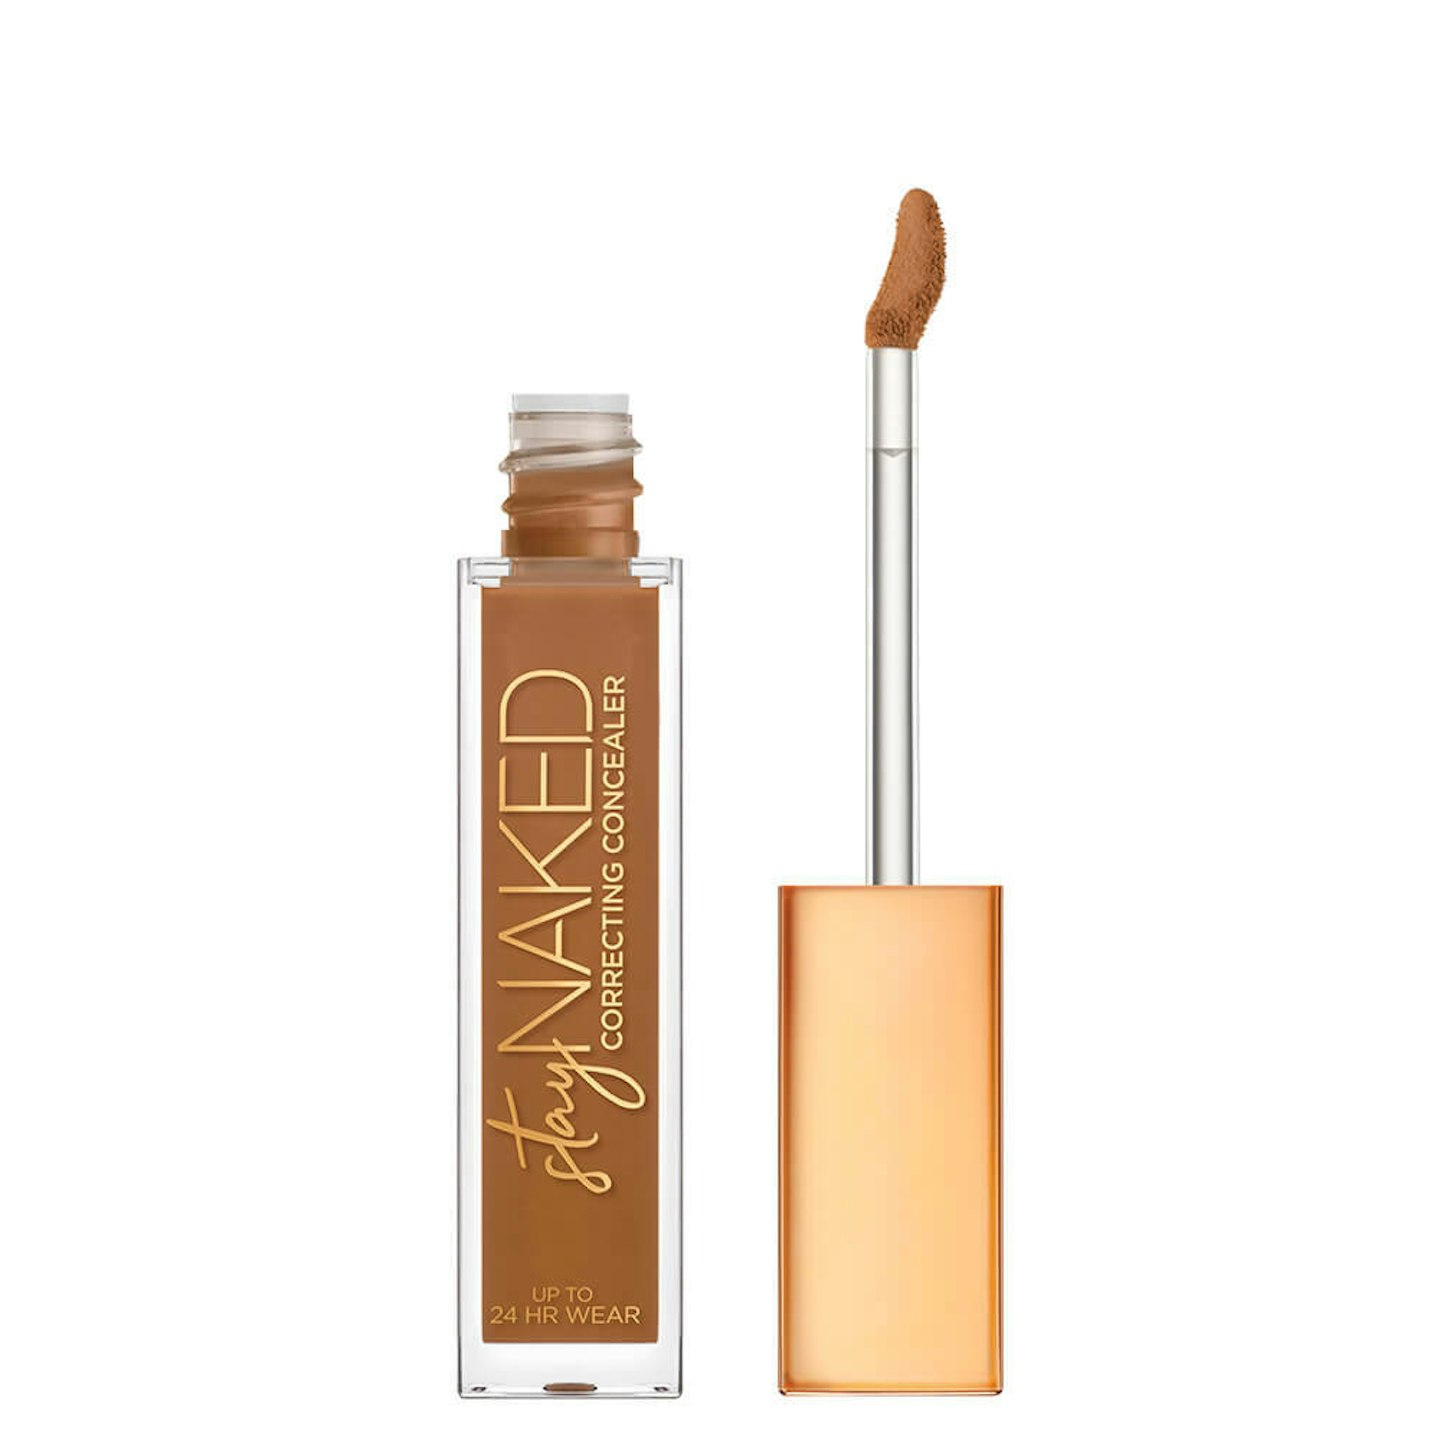 Urban Decay Stay Naked Concealer, £23